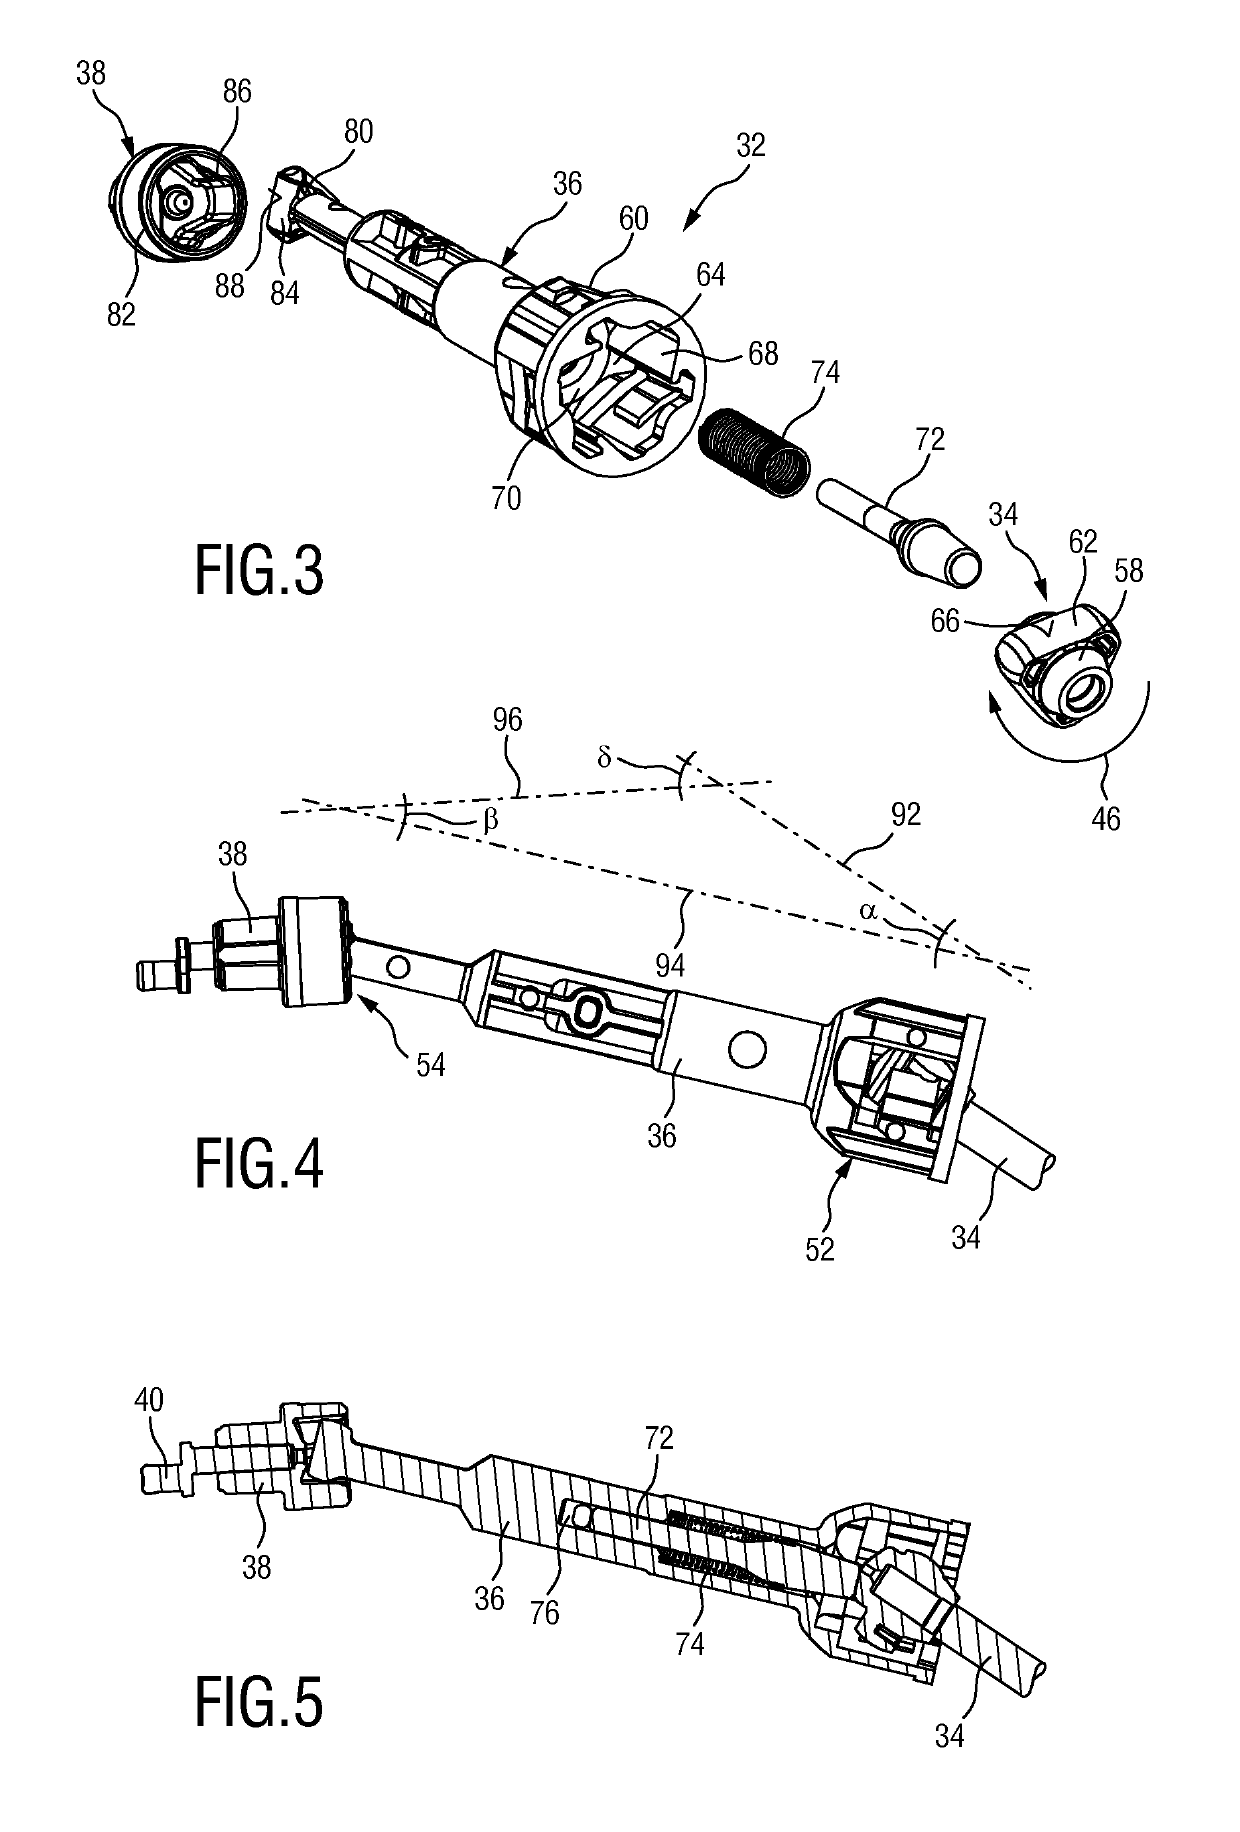 Coupling mechanism for a drive train of a hair cutting appliance